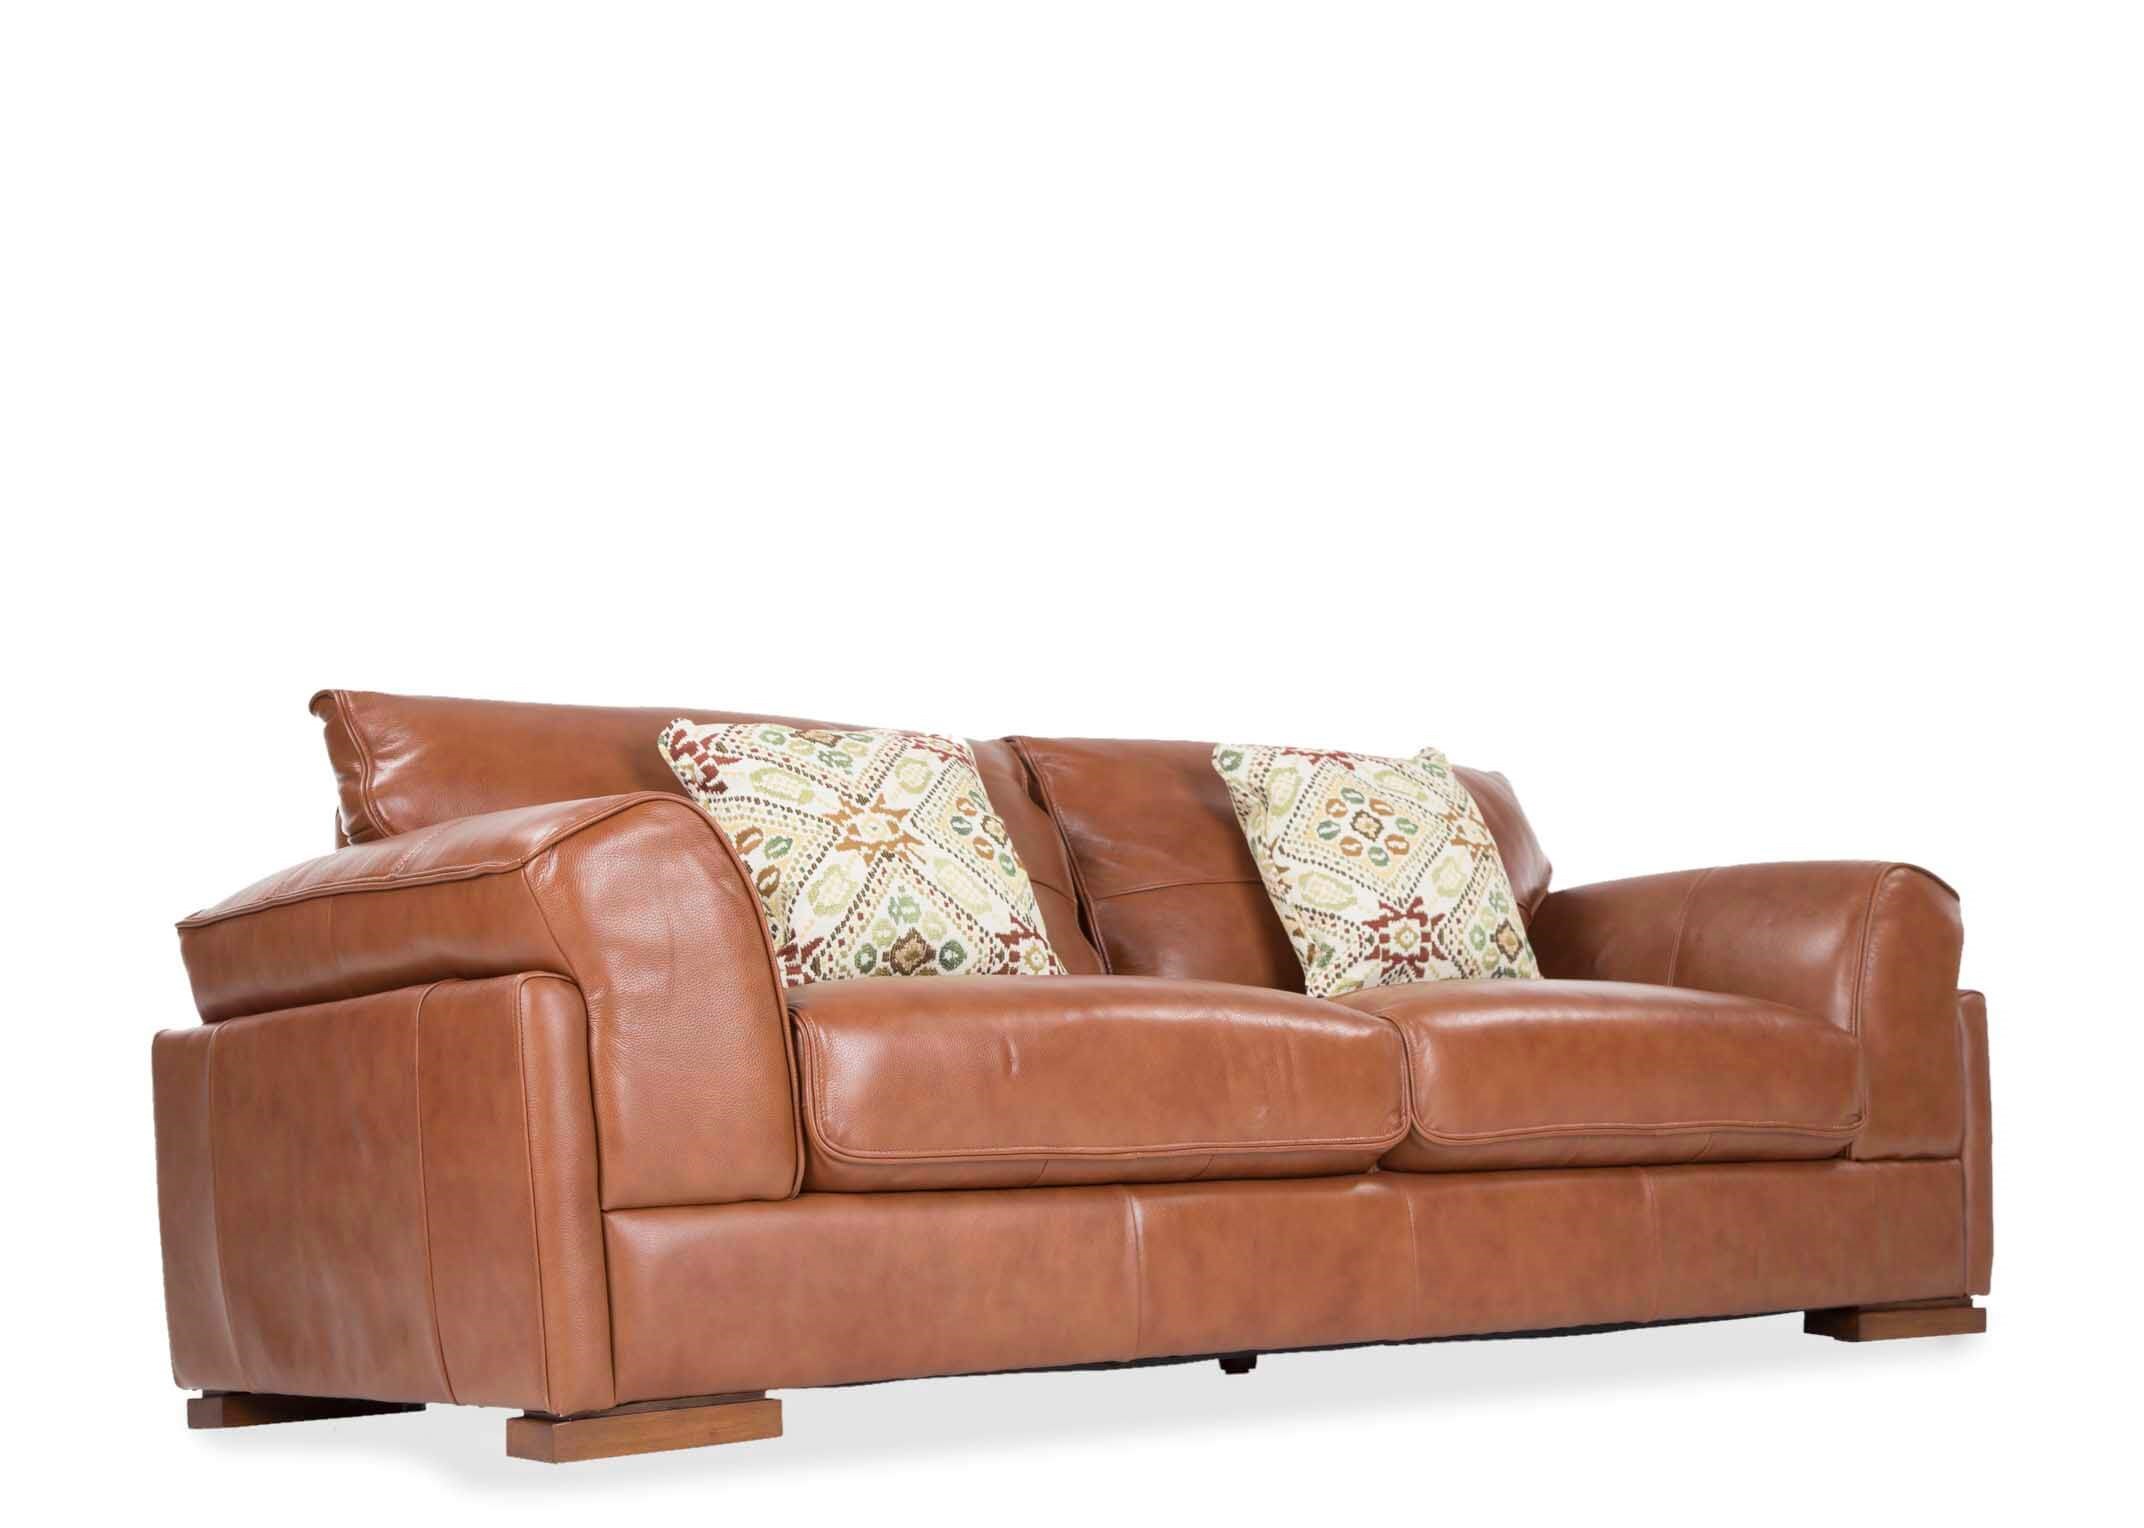 3 Seater Brown Leather Sofa Torino, Leather Couch Brown